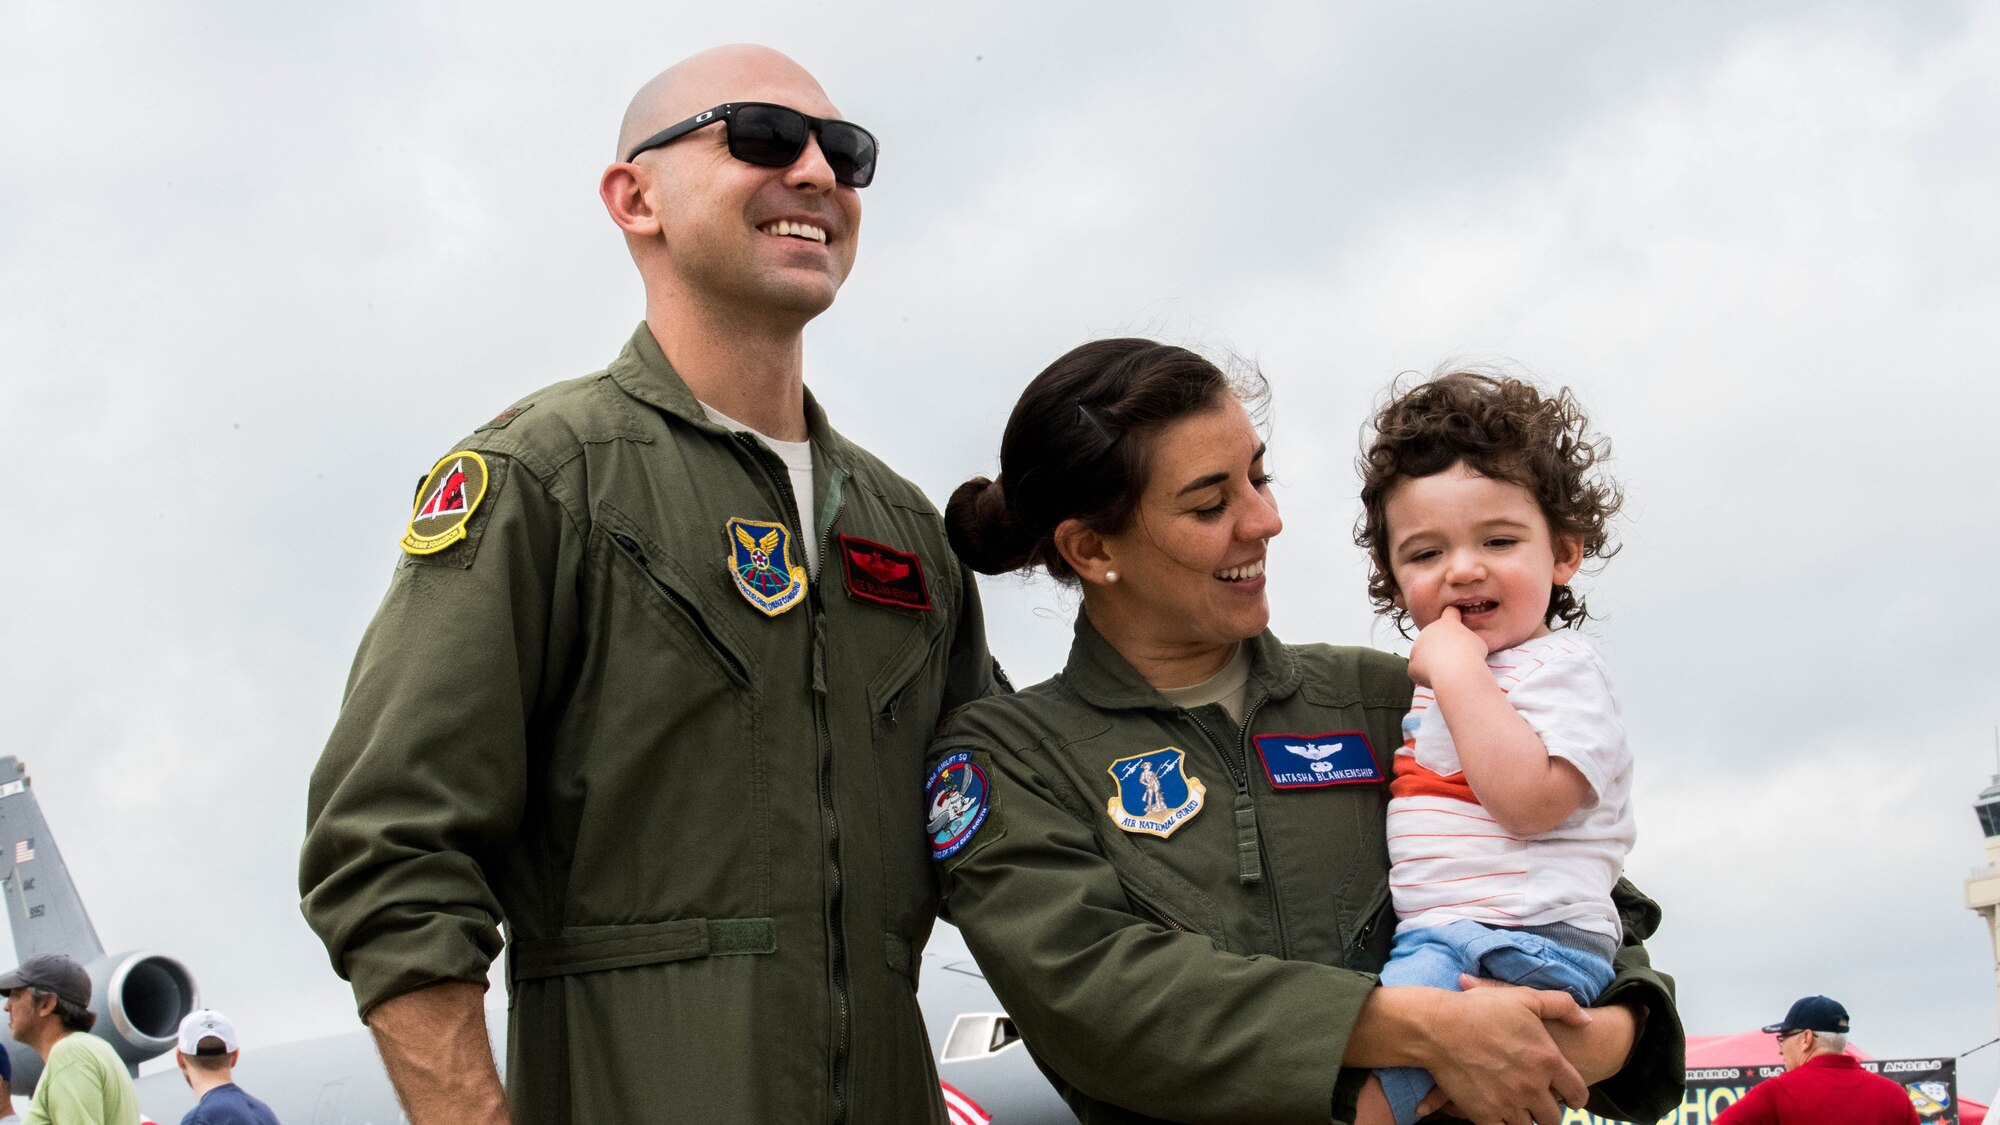 Maj. John R. Blankenship, a B-52 Stratofortress pilot with the 96th Bomb Squadron, his wife Maj. Natasha E. Blankenship, a C-17 Globemaster III pilot with the 183rd Airlift Squadron in Jackson, Mississippi, and their year and a half old son, Dane, enjoy the Barksdale Defenders of Liberty Air Show at Barksdale Air Force Base, La., May 18, 2019. Over 80,000 spectators  from the Ark-La-Tex region May 18 and 19, 2019 to witness a full weekend of military and civilian aircraft performances and displays. (U.S. Air Force photo by Airman Jacob B. Wrightsman)